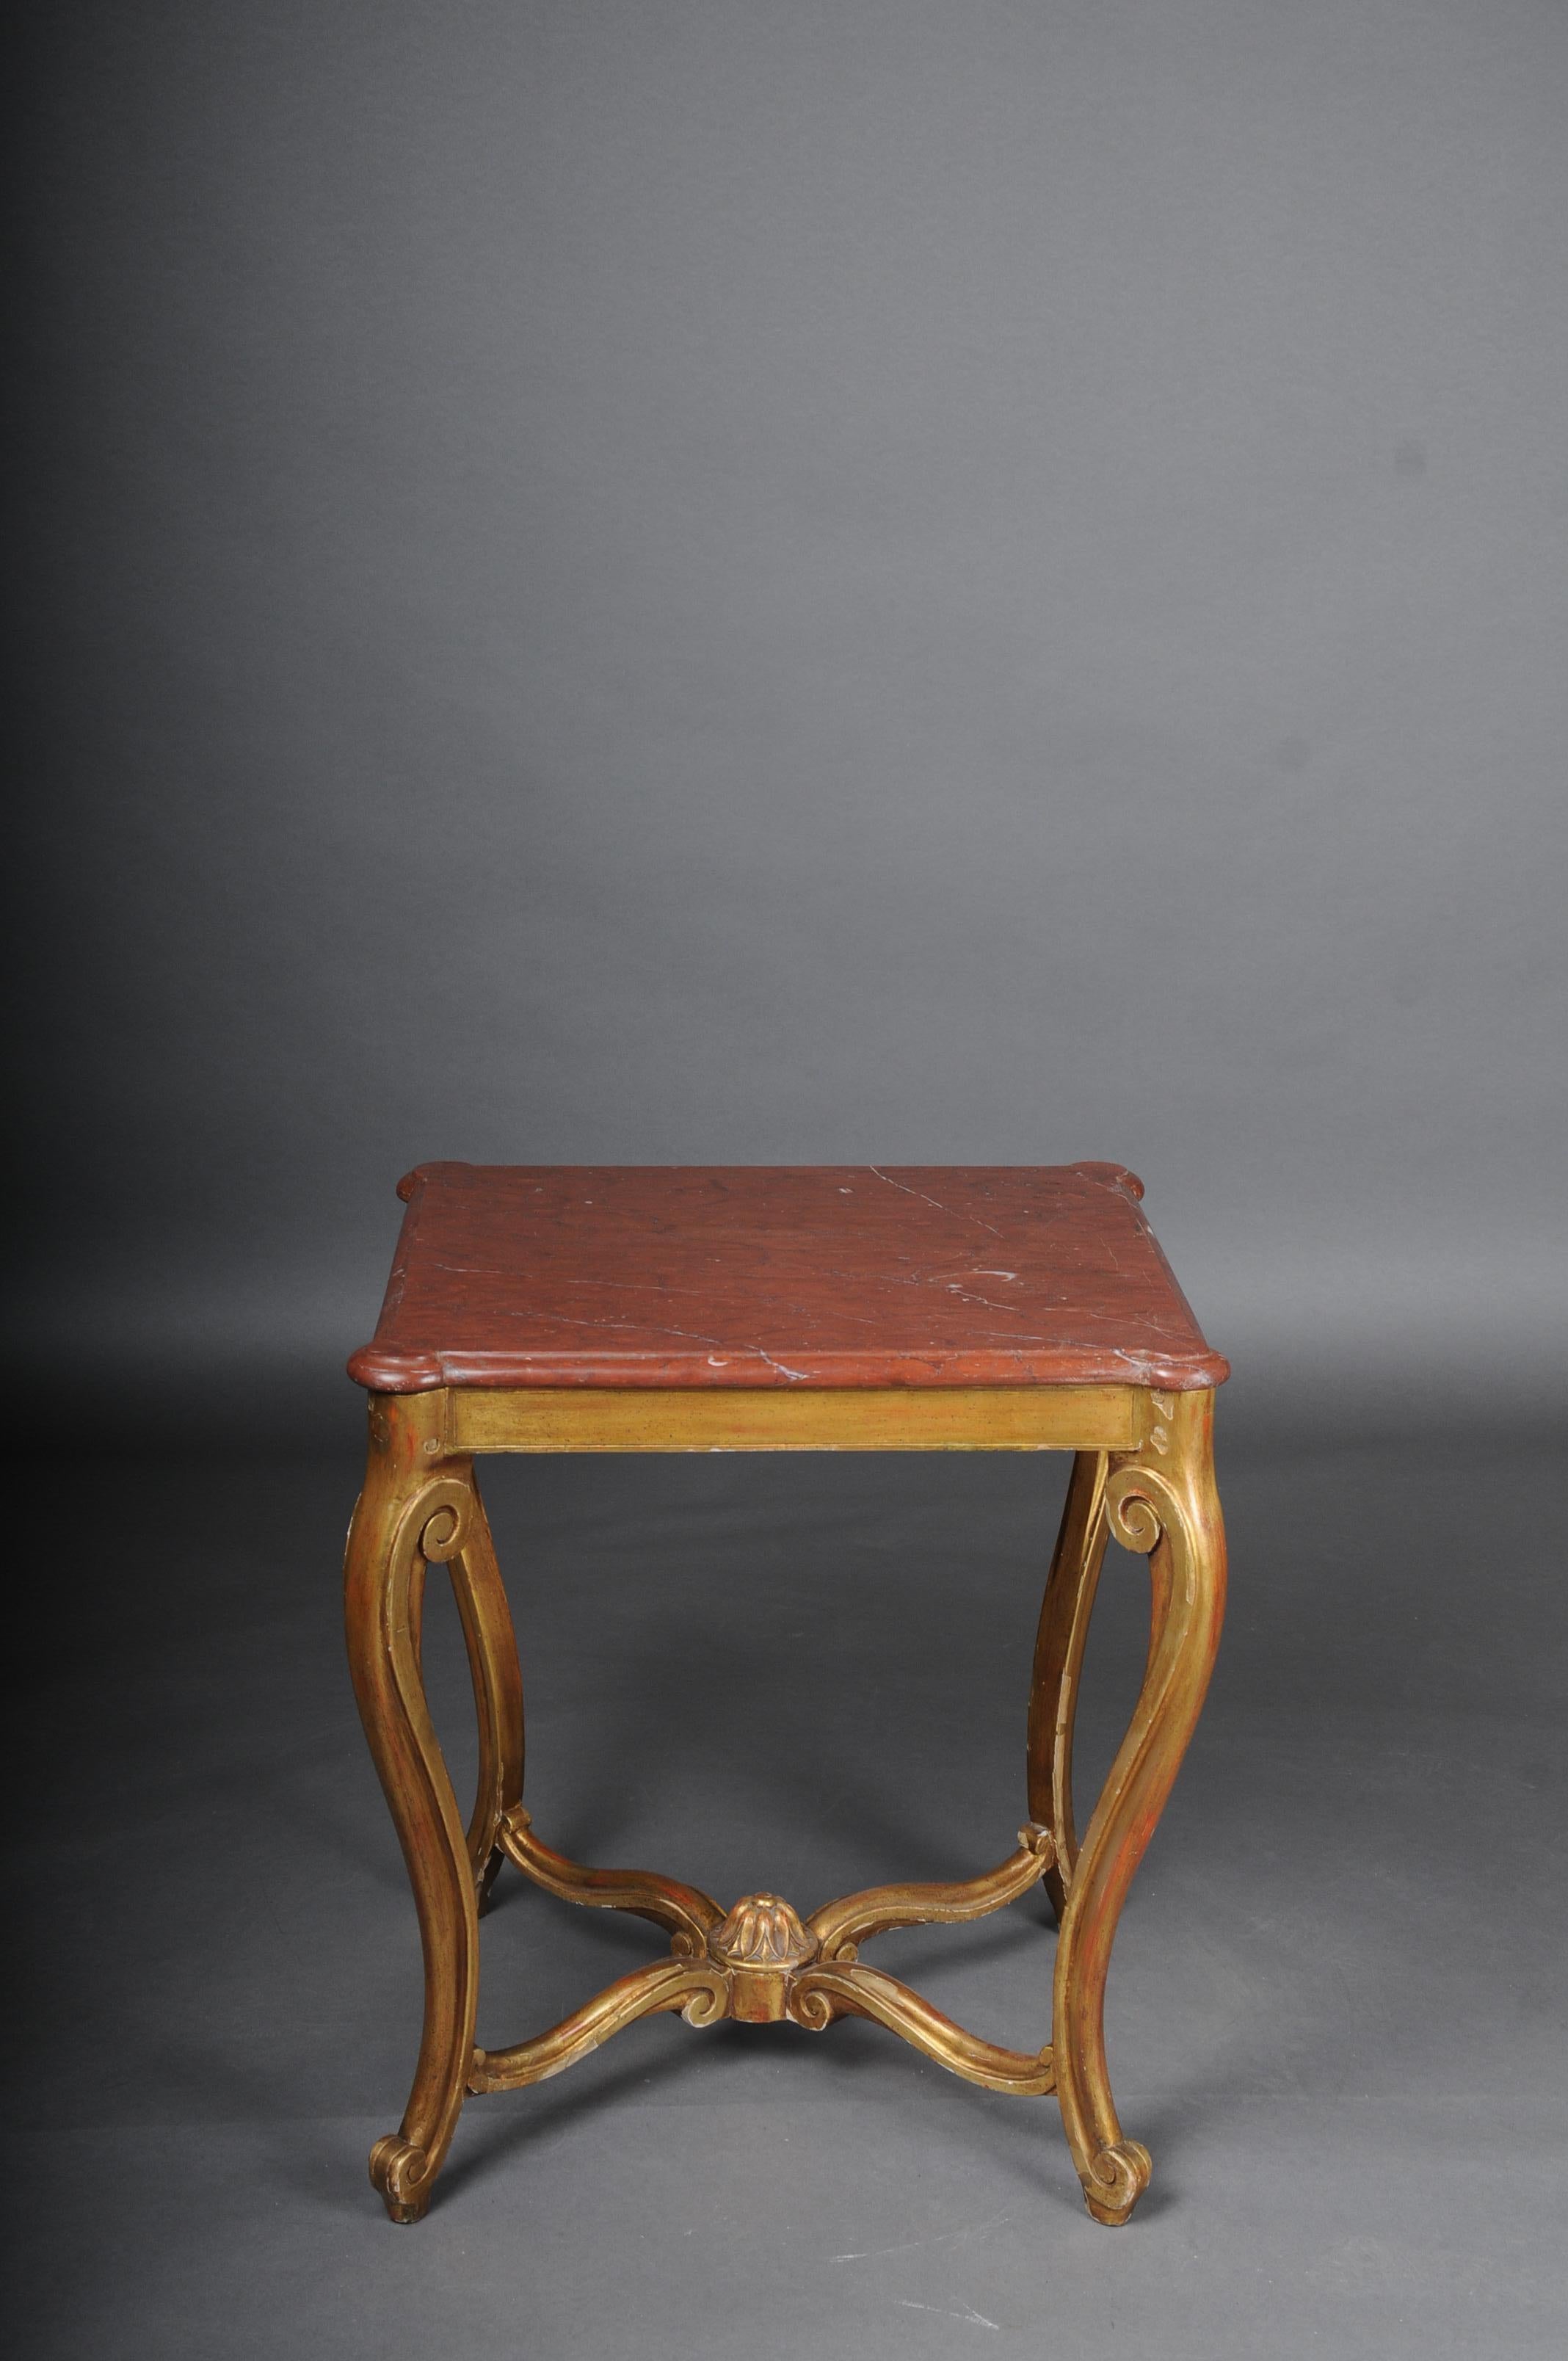 classic French side table, Louis XV, gold

Solid wood body, gilded and patented. Slightly protruding and profiled marble top